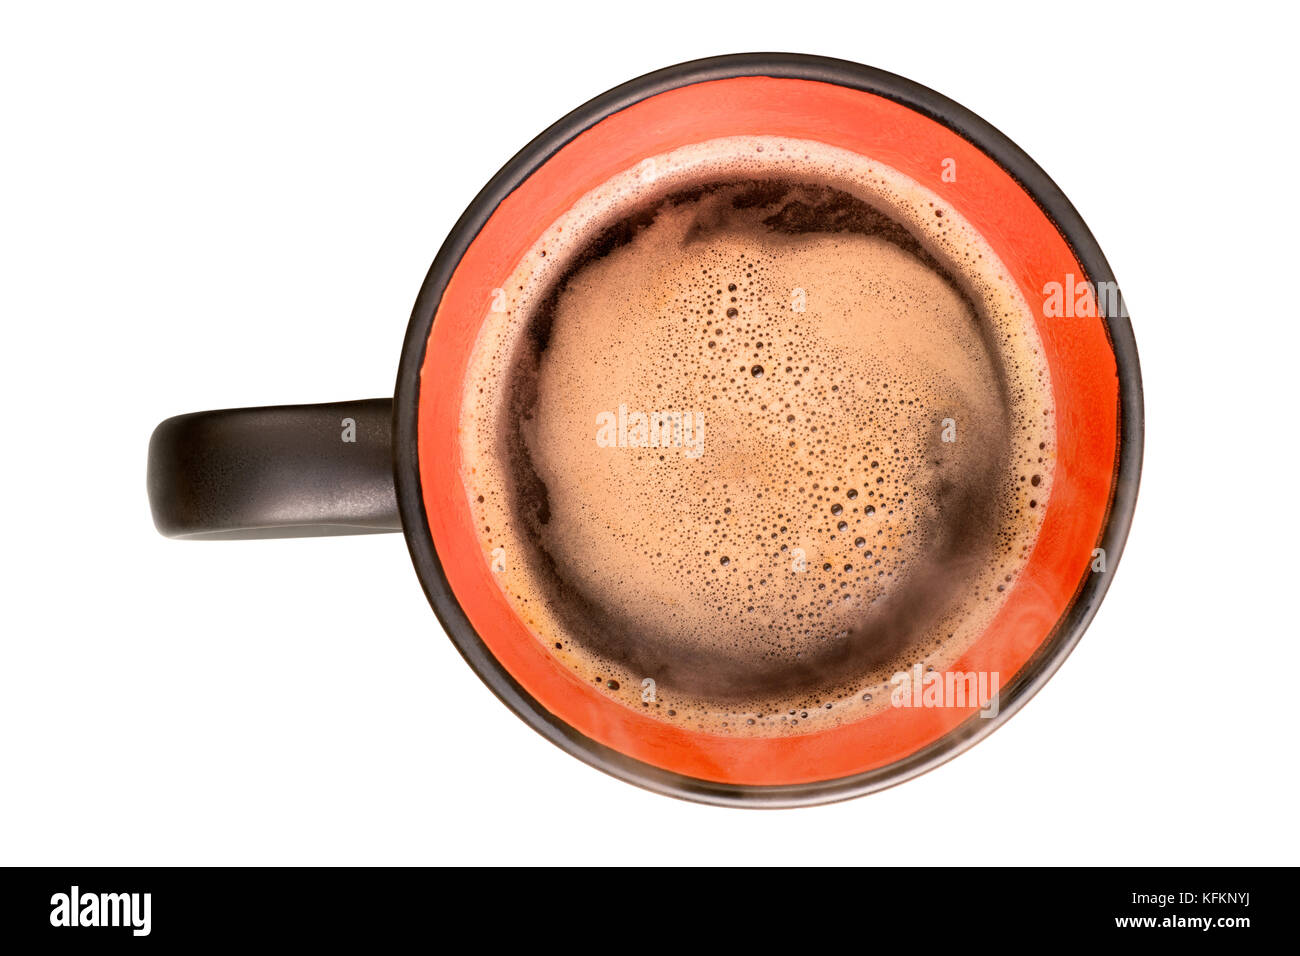 https://c8.alamy.com/comp/KFKNYJ/large-coffee-cup-close-up-top-view-isolated-on-white-with-clipping-KFKNYJ.jpg